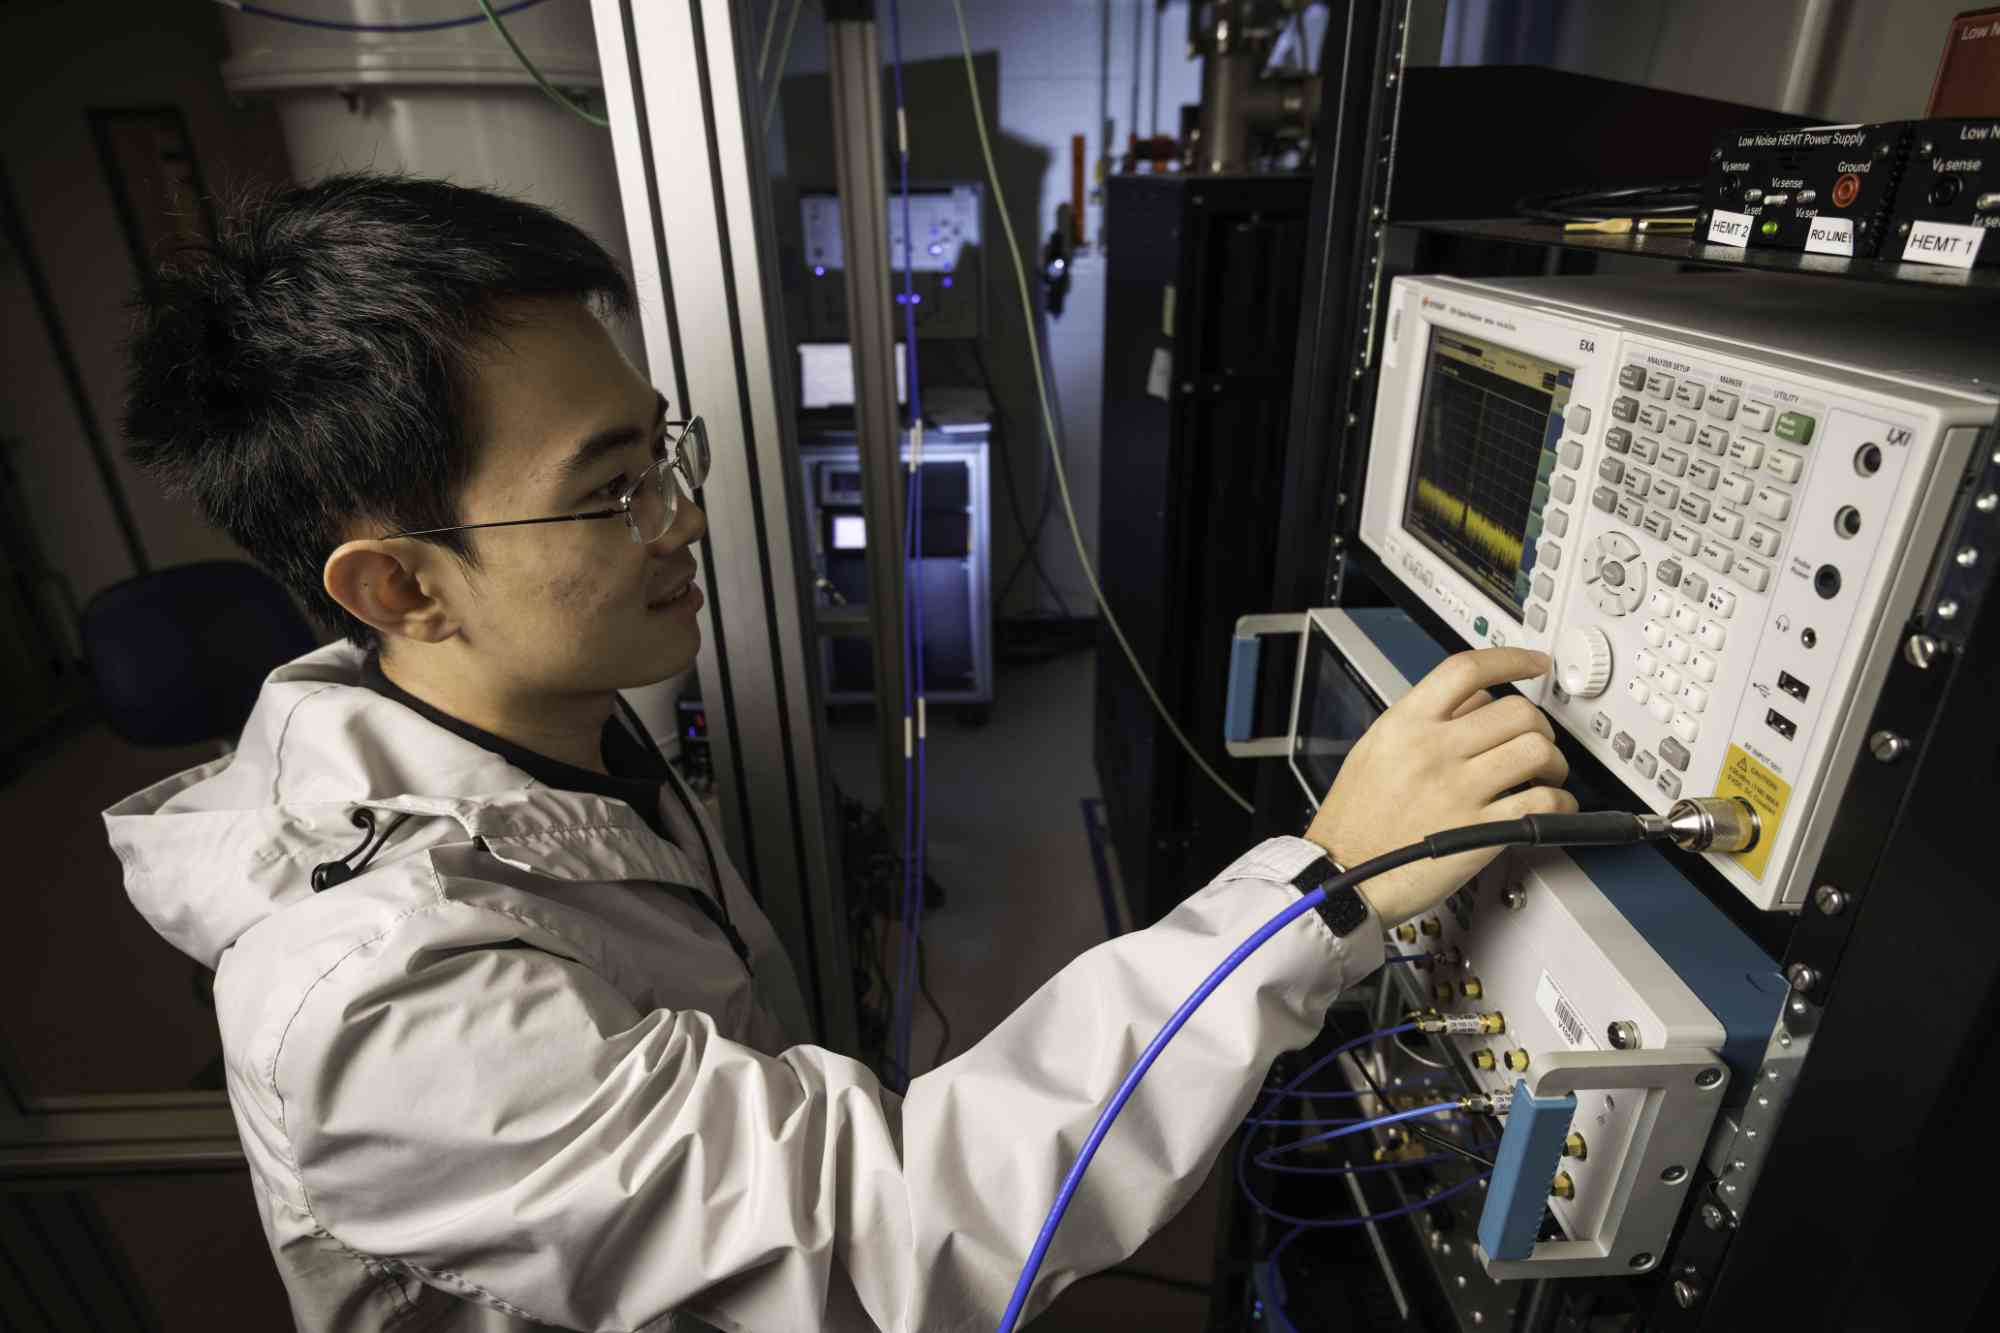 Graduate student working on a microwave control